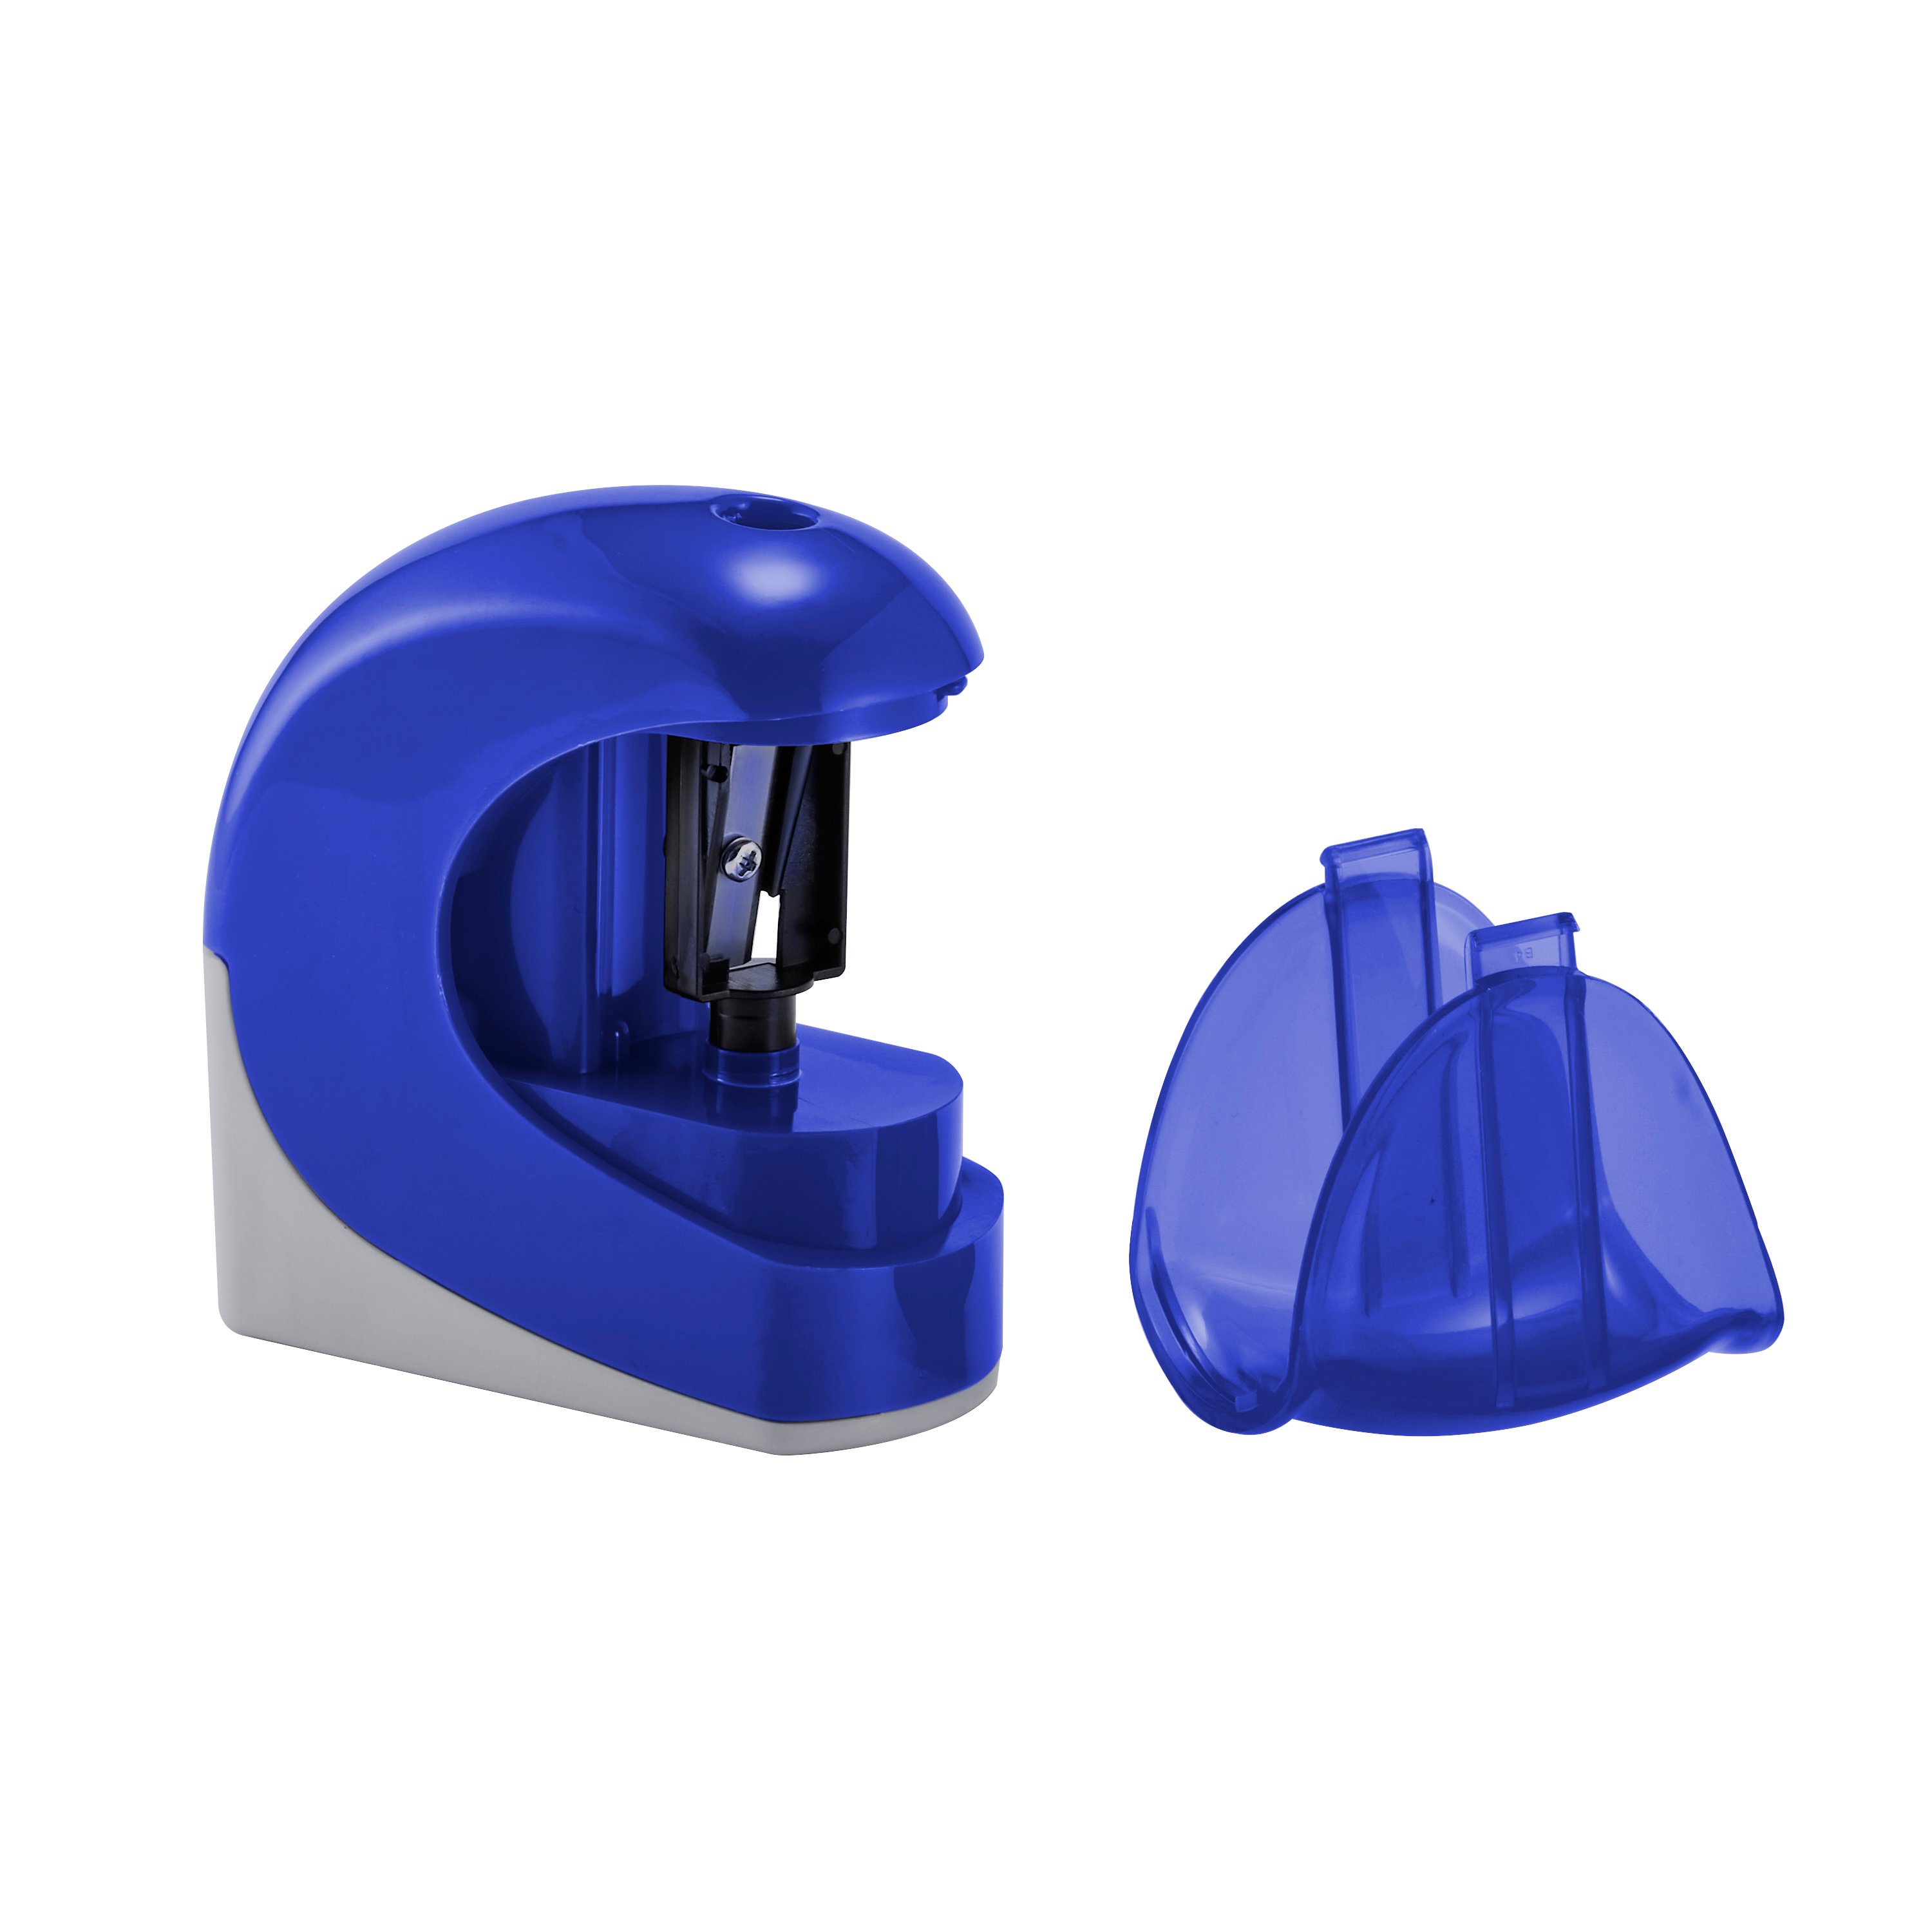 It's Academic Battery Operated Pencil Sharpener - Shop Pencil Sharpeners at  H-E-B